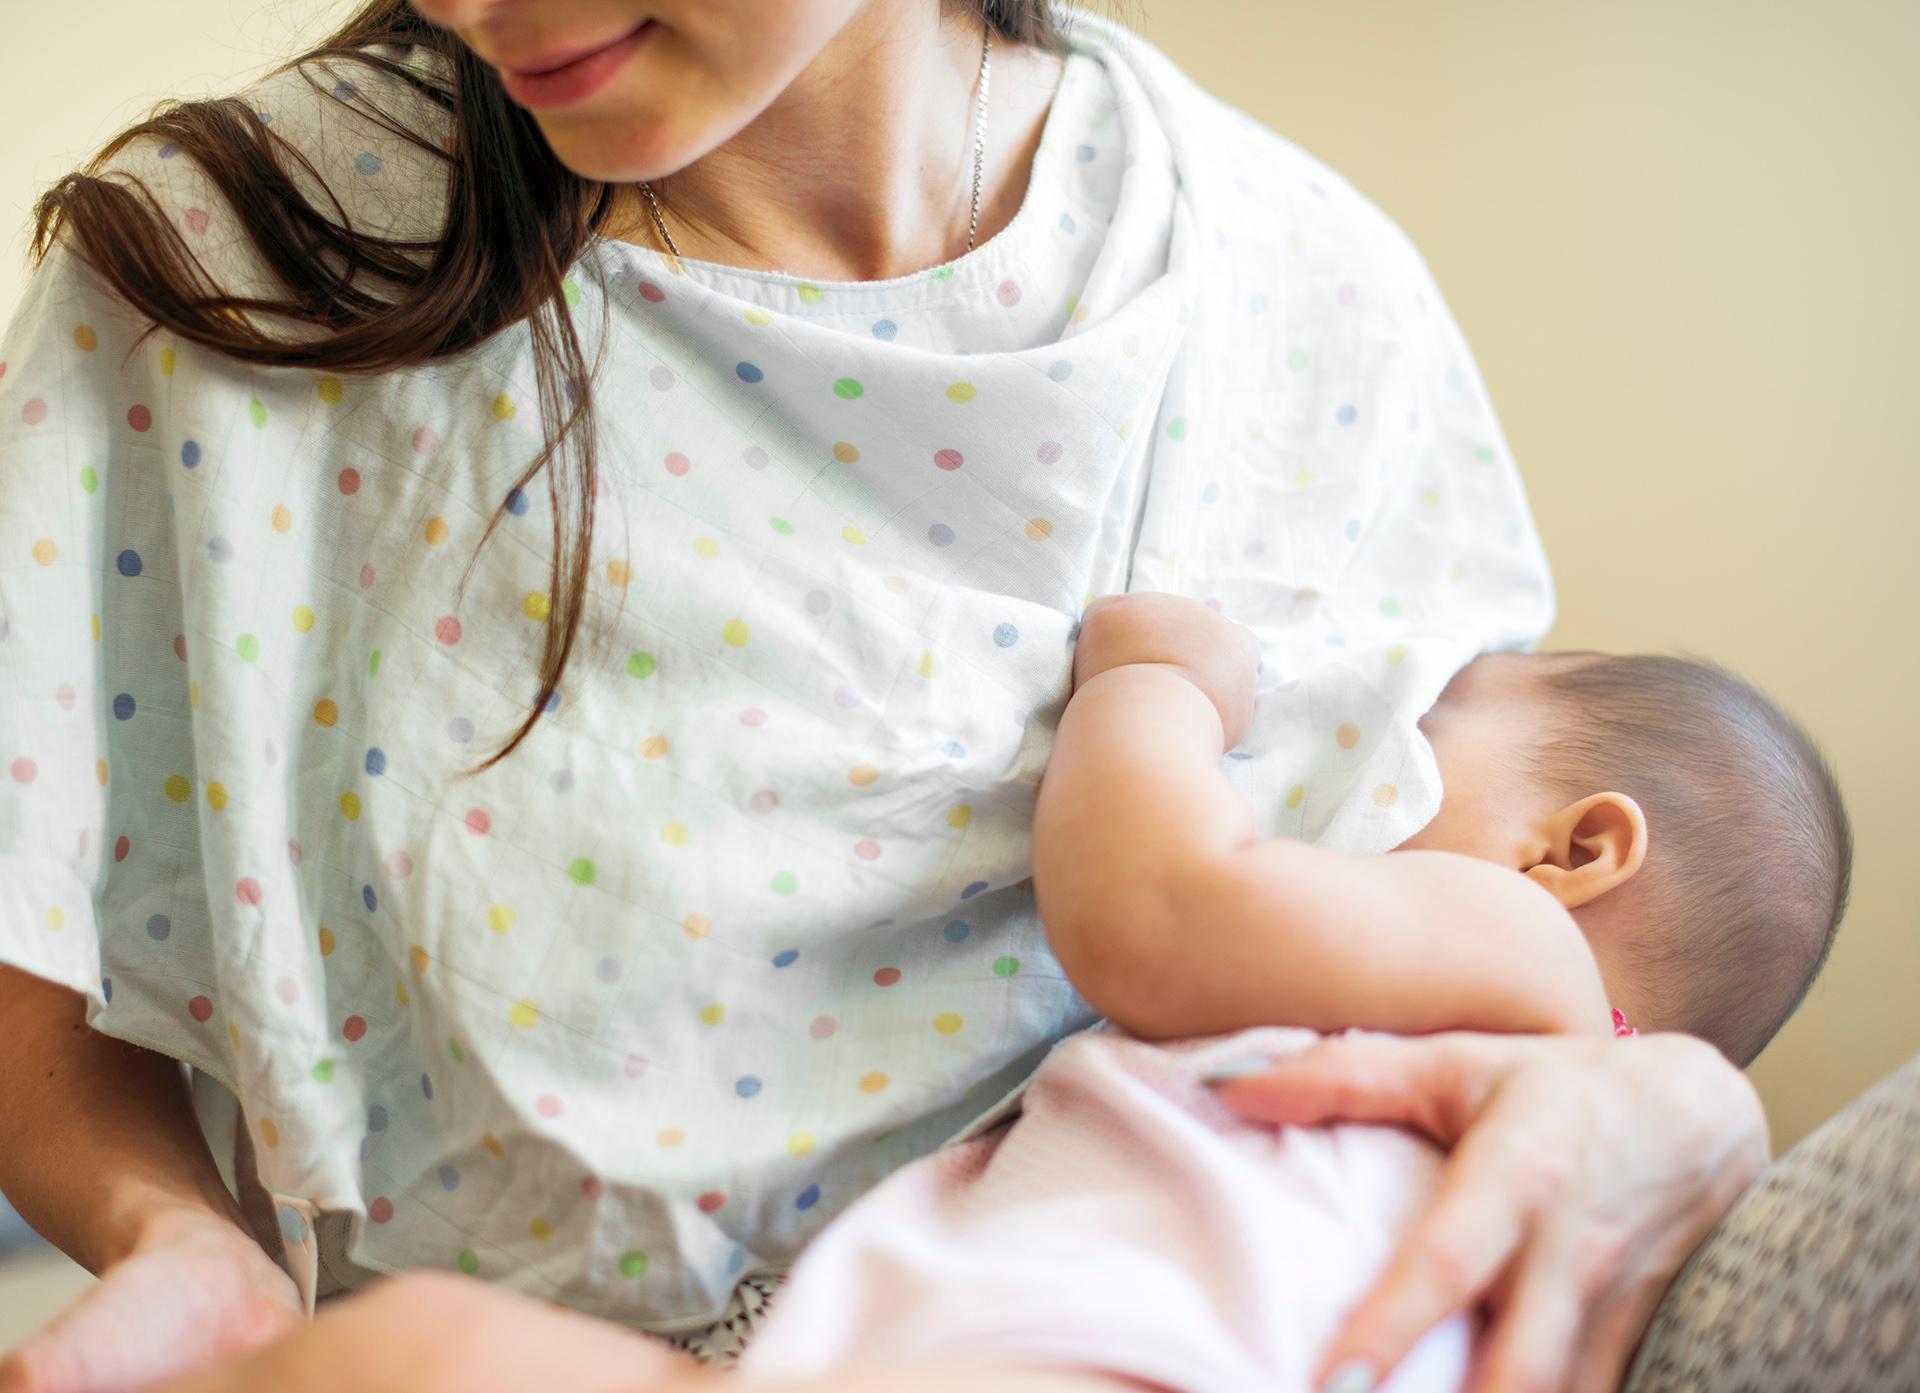 Breastfeeding Benefits for Mother's Health: What is the Psychological Impact?